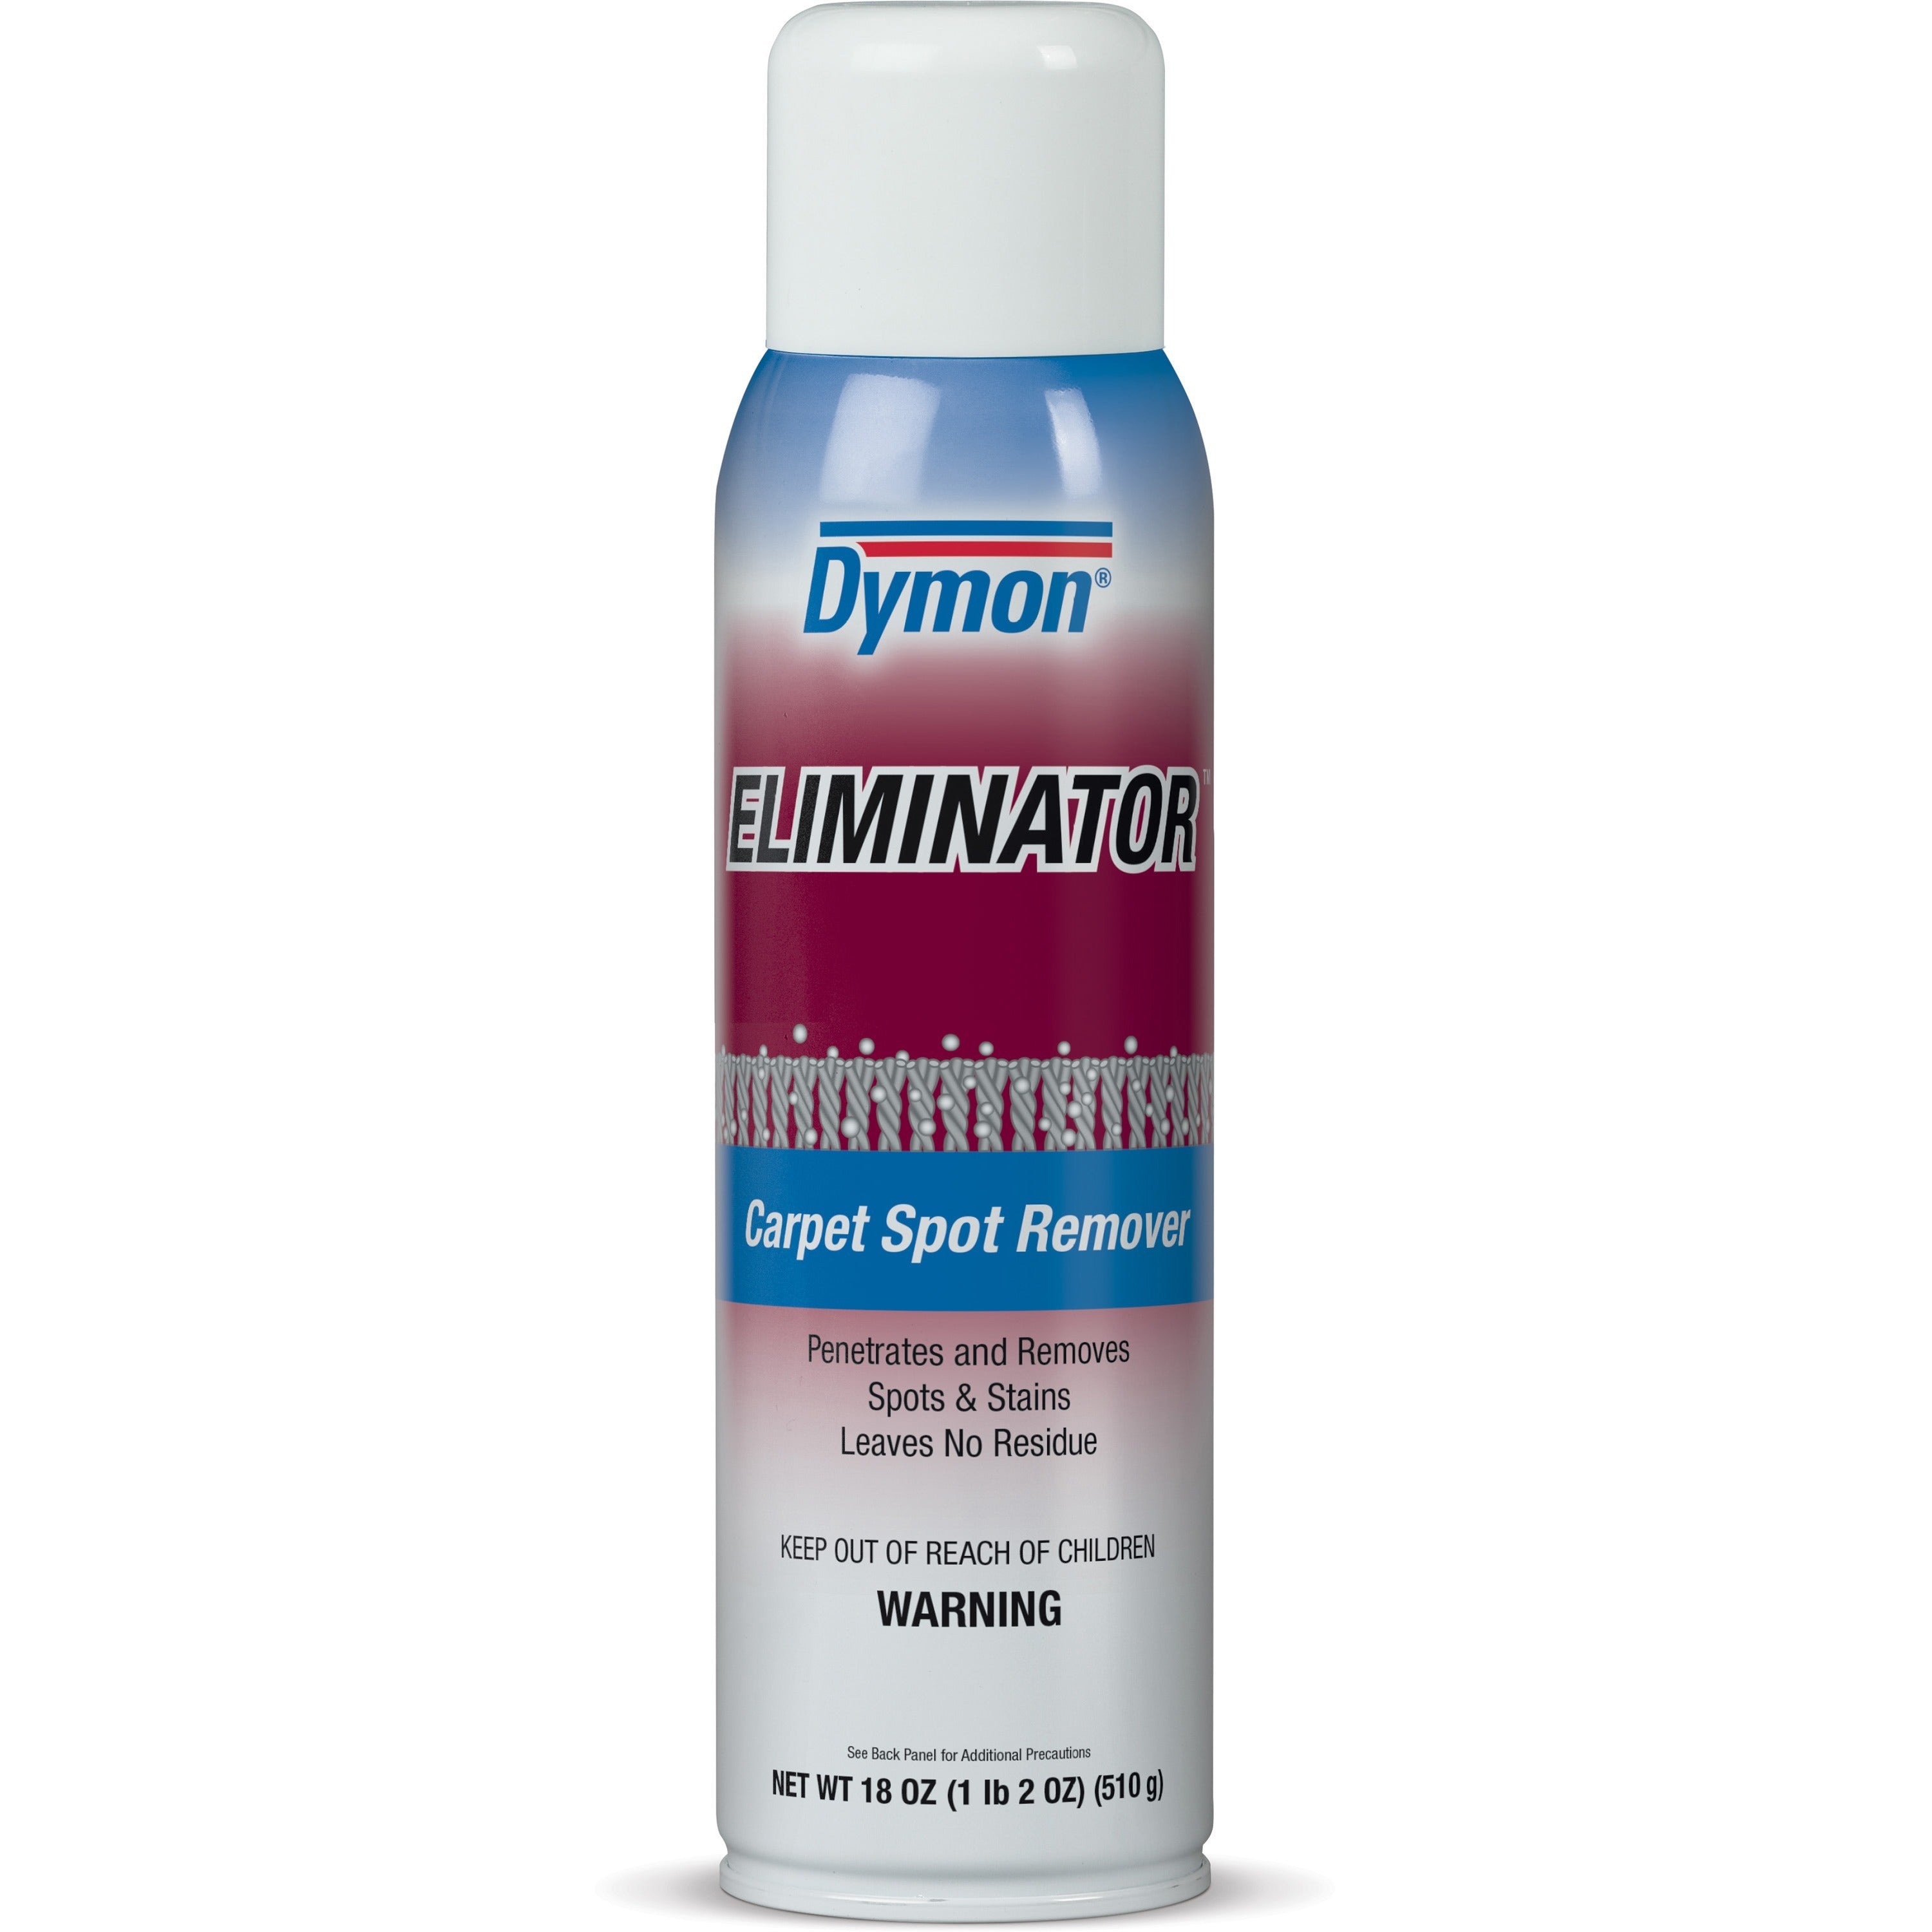 dymon-eliminator-carpet-spot-remover-cleaner-18-oz-112-lb-12-carton-water-based-deodorize-textured-white_itw10620ct - 1